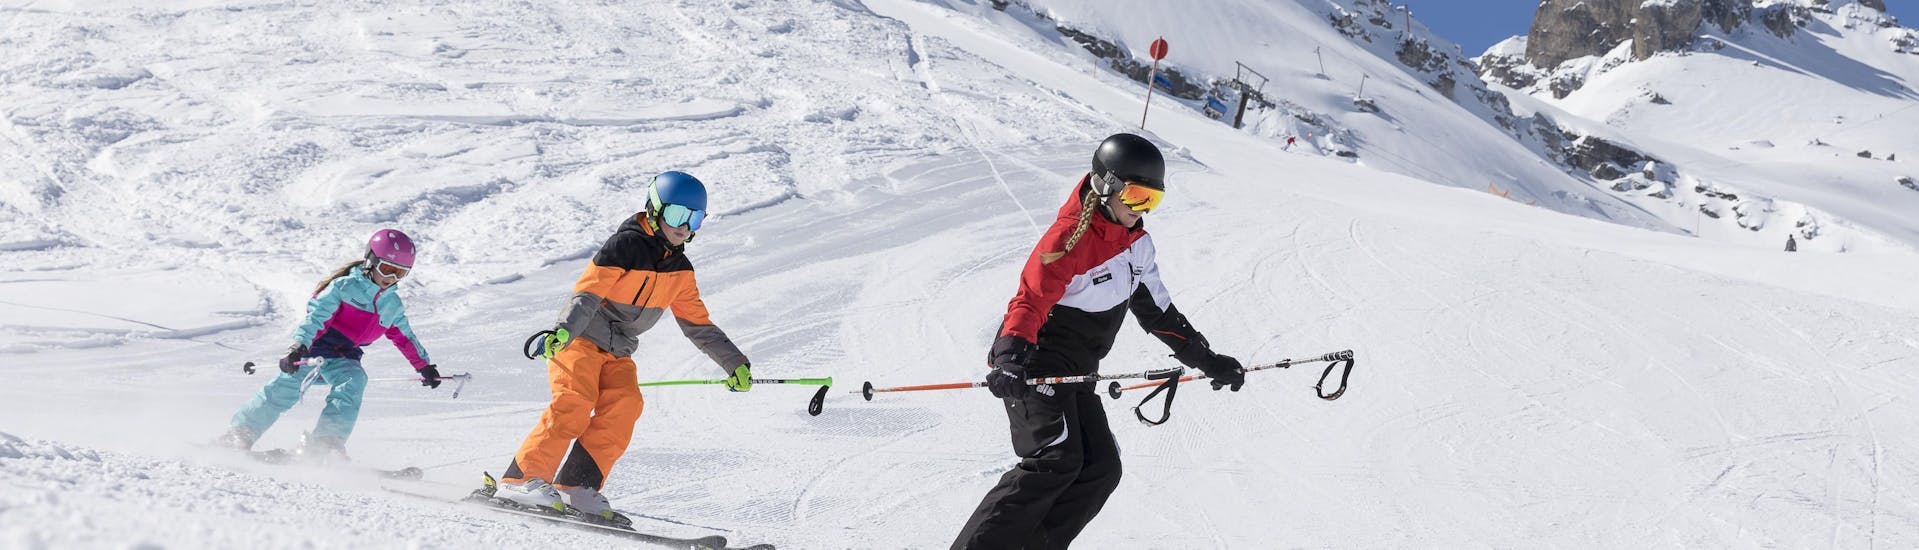 A group of skiers during their kids ski lessons for advanced skiers in Stubai.